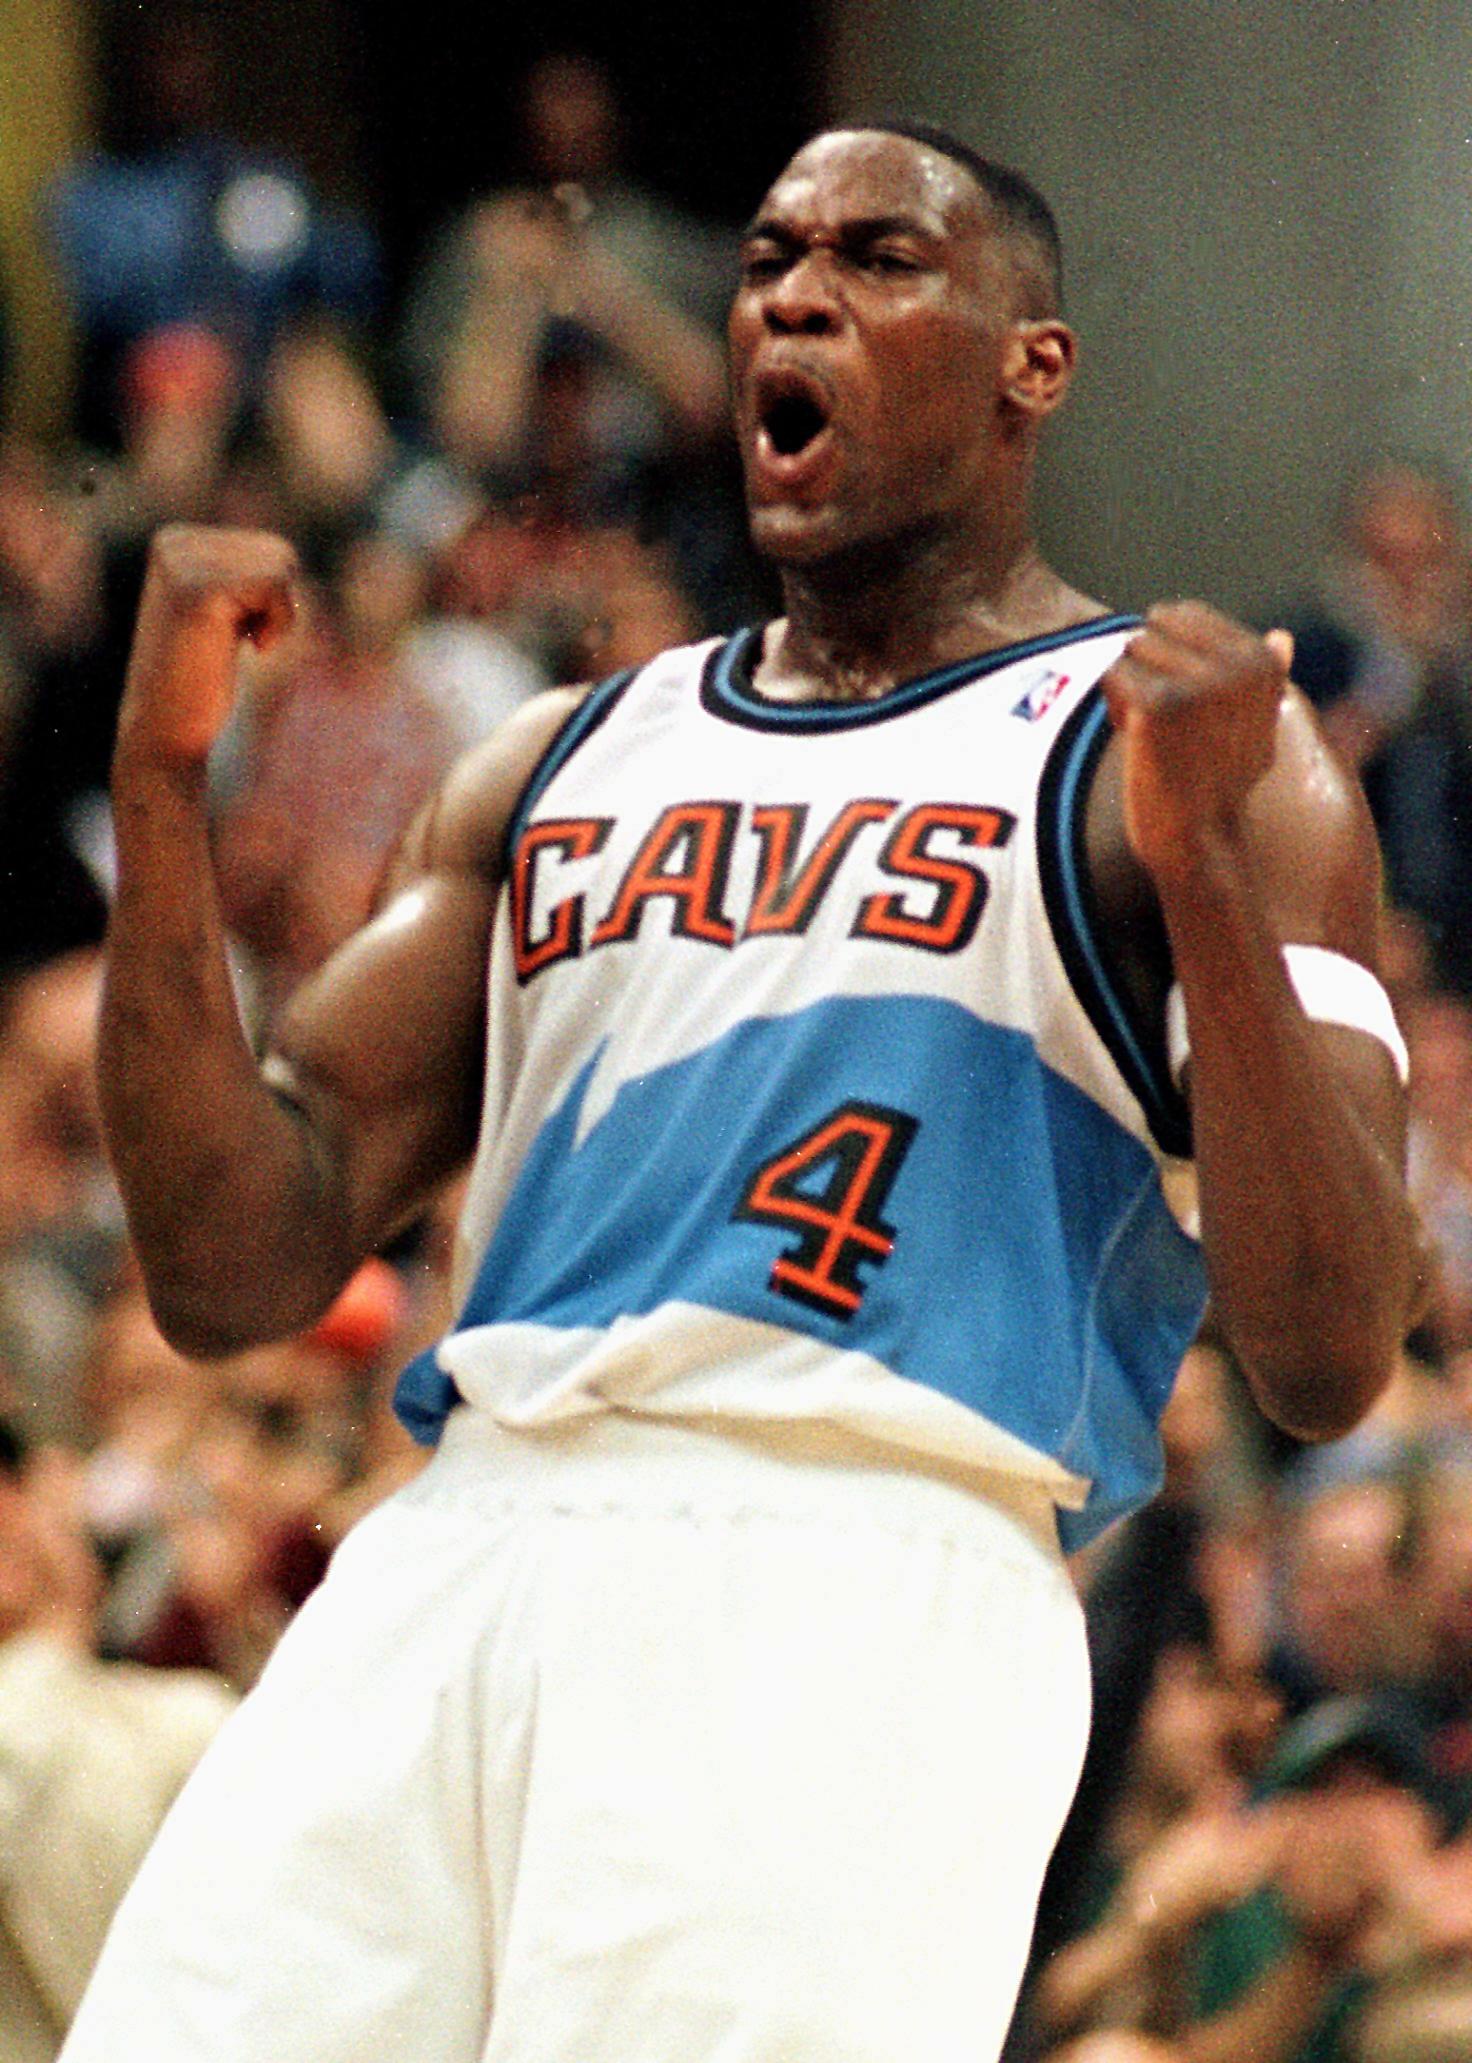 Shawn Kemp  Nba, Cavs, Basketball pictures